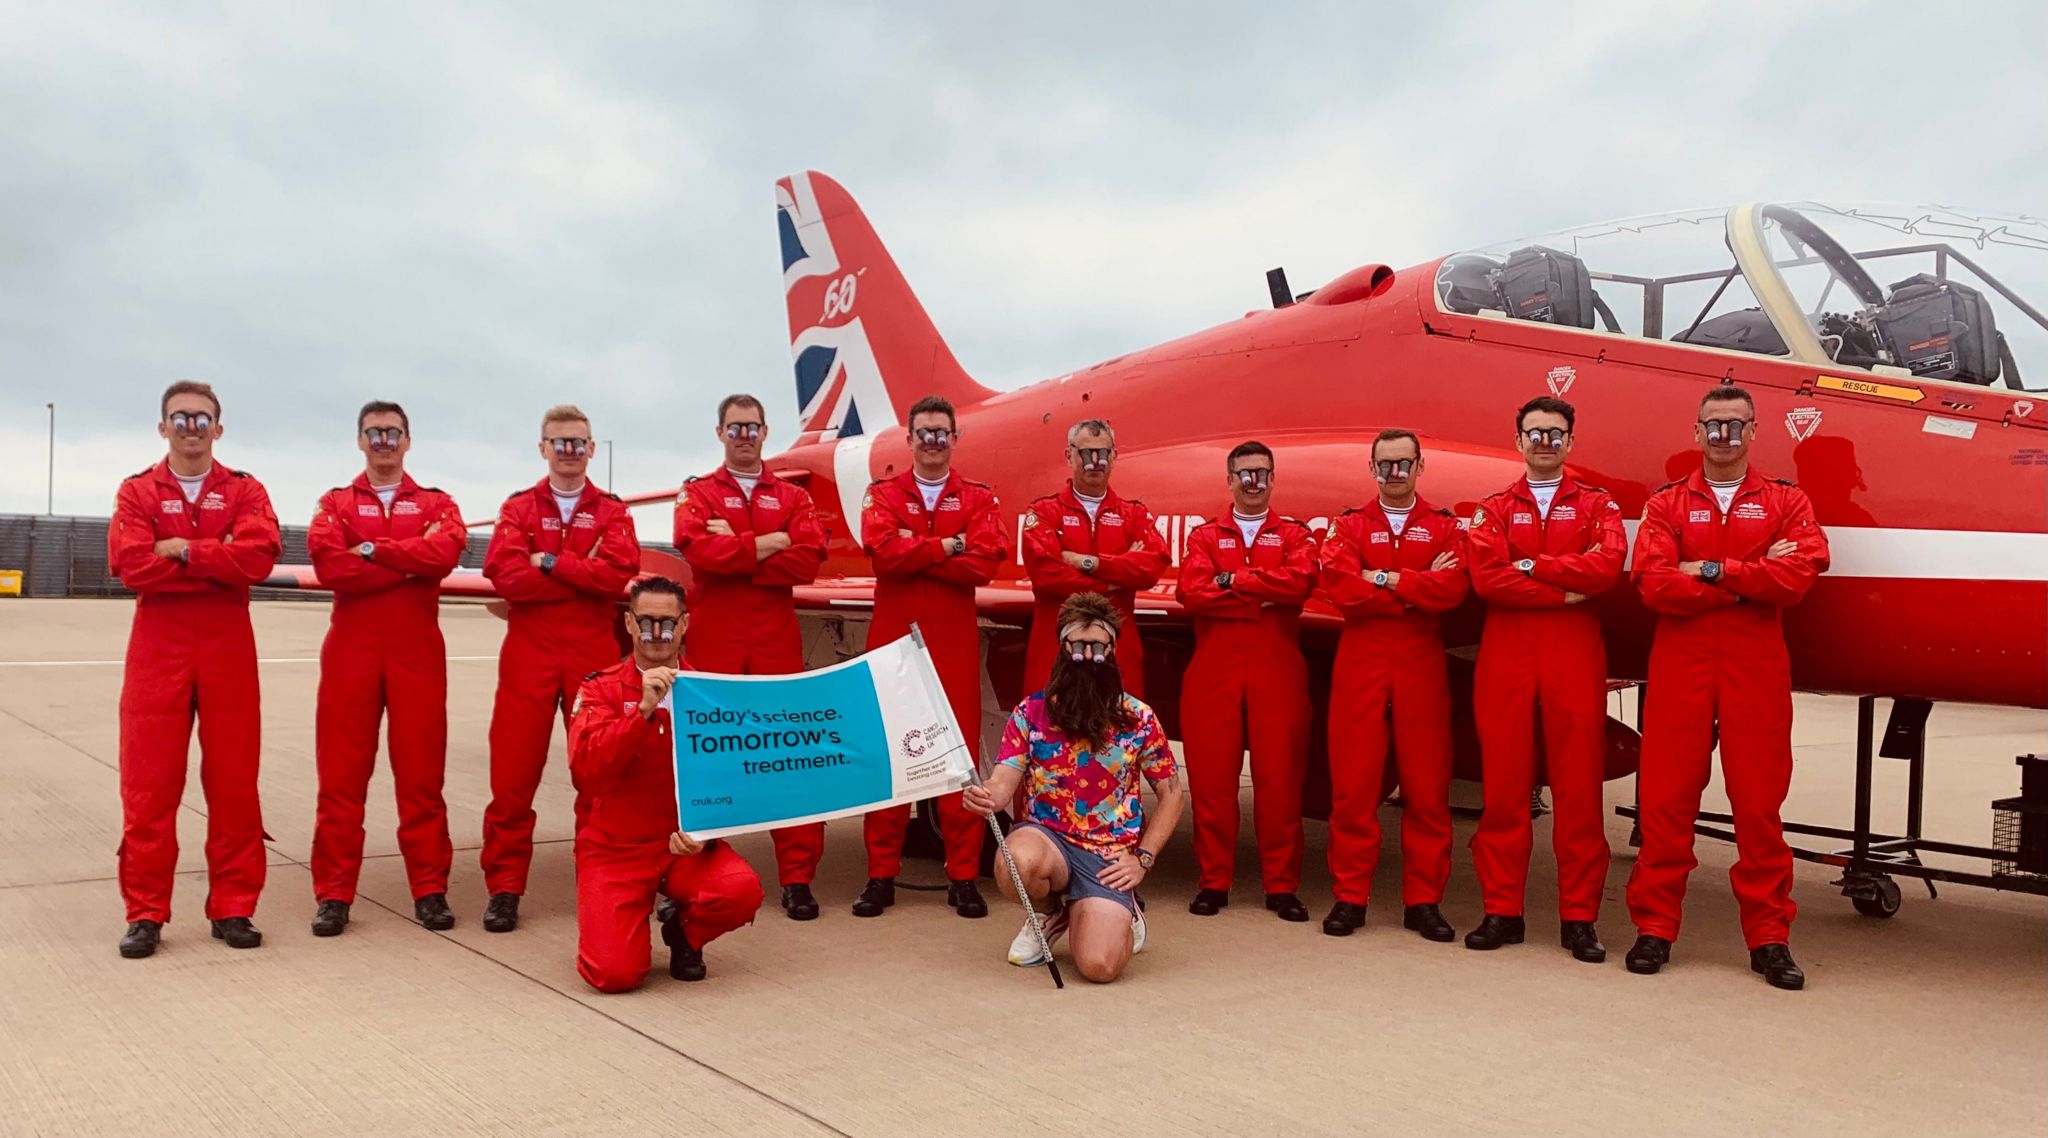 Neville pictured with the Red Arrows team